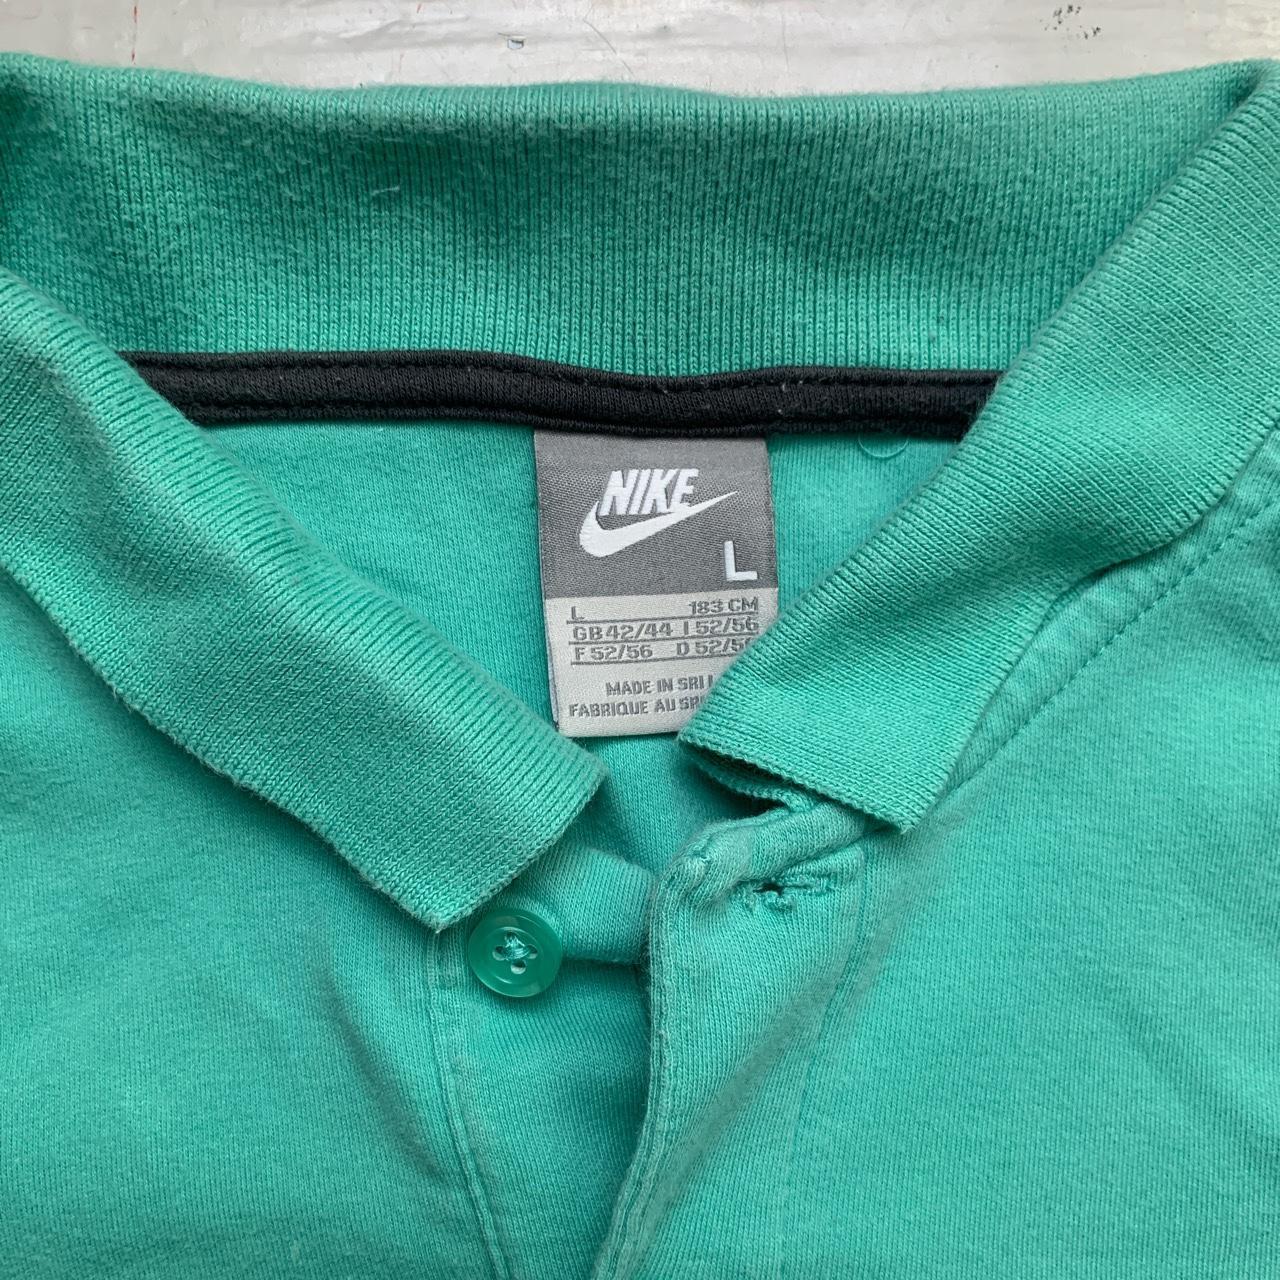 Nike Swoosh Vintage Polo Green and Black